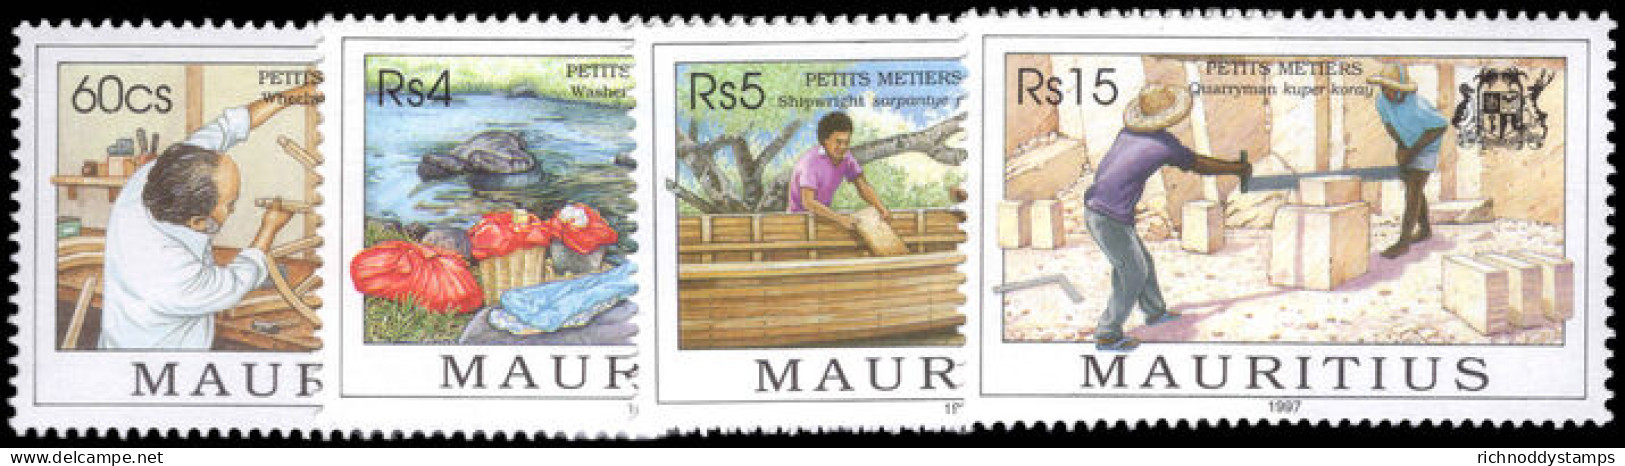 Mauritius 1997 Small Businesses Unmounted Mint. - Mauritius (1968-...)